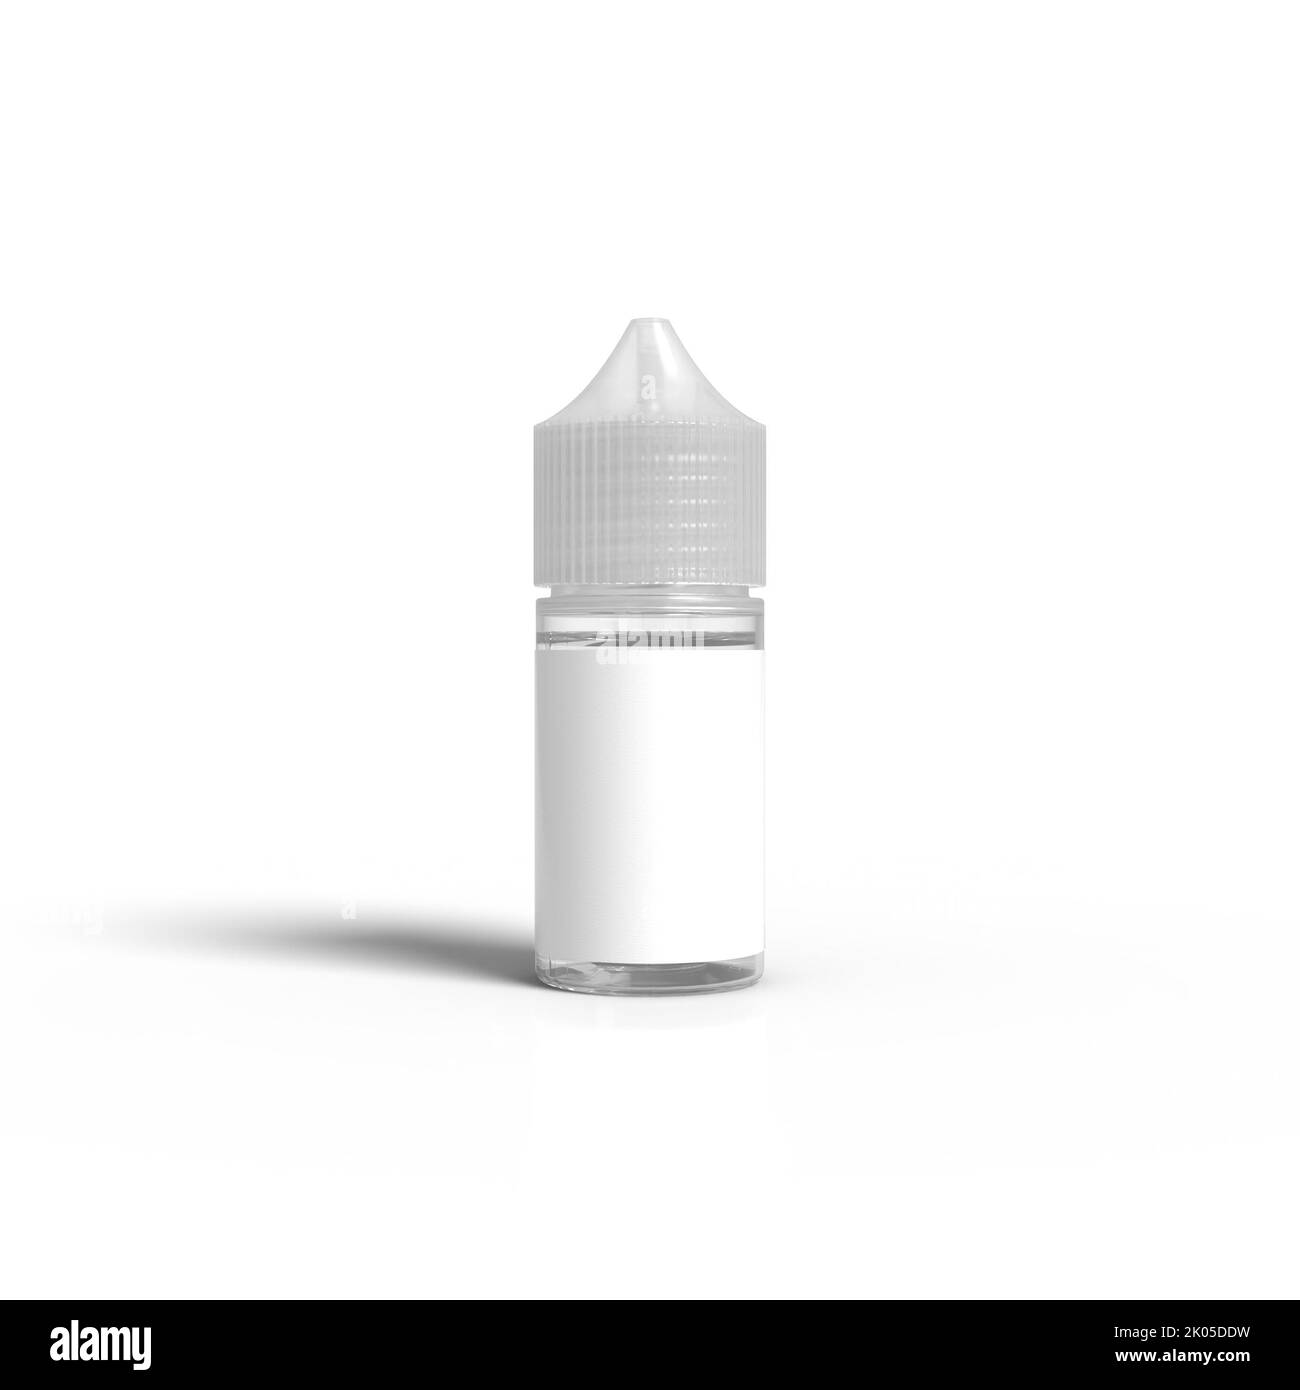 Chubby Gorilla 30ml Vape e Juice Bottle filled with Nicotine Vape Juice with a white label isolated on a White Background. 3D Render Illustration Stock Photo